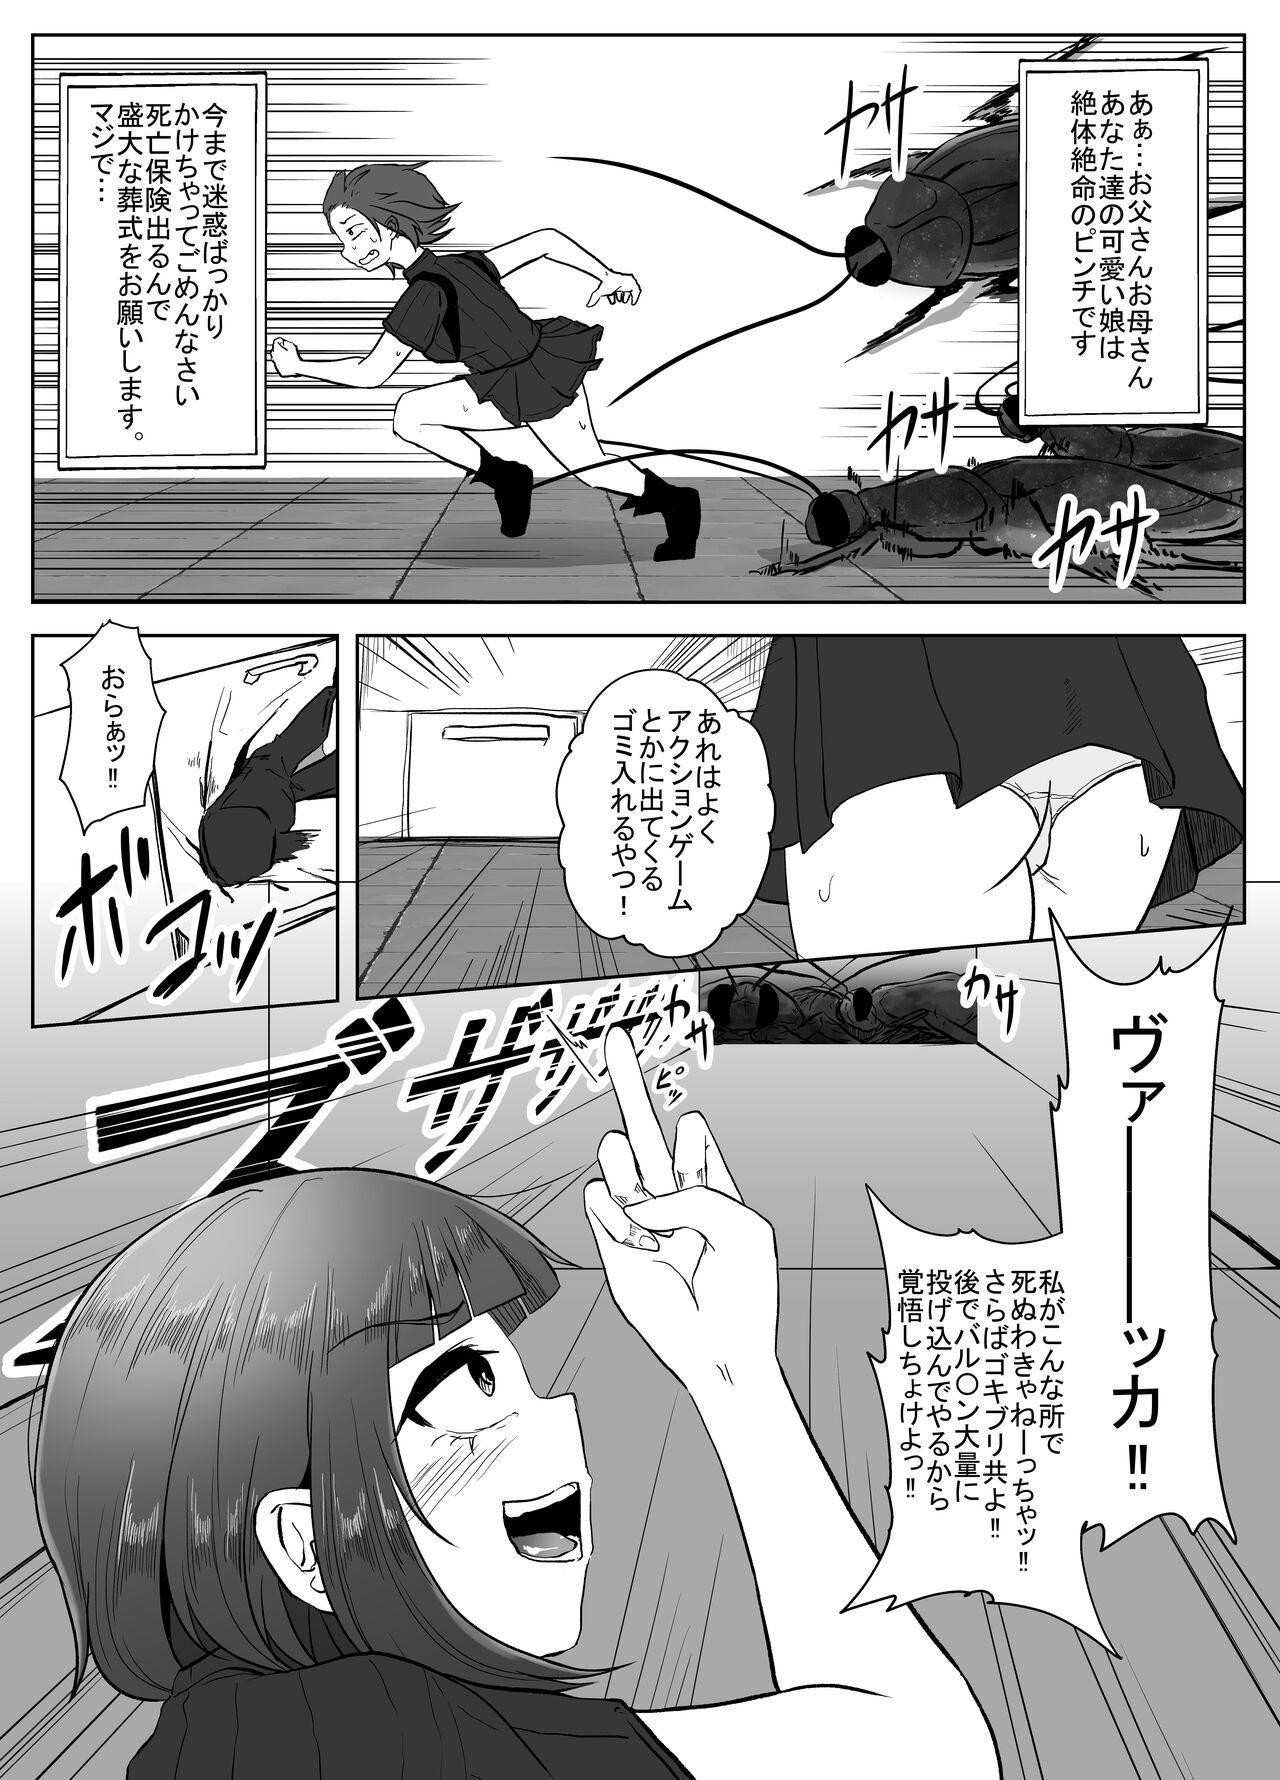 Show 蟲駆士ハヅキ - Original Awesome - Page 6